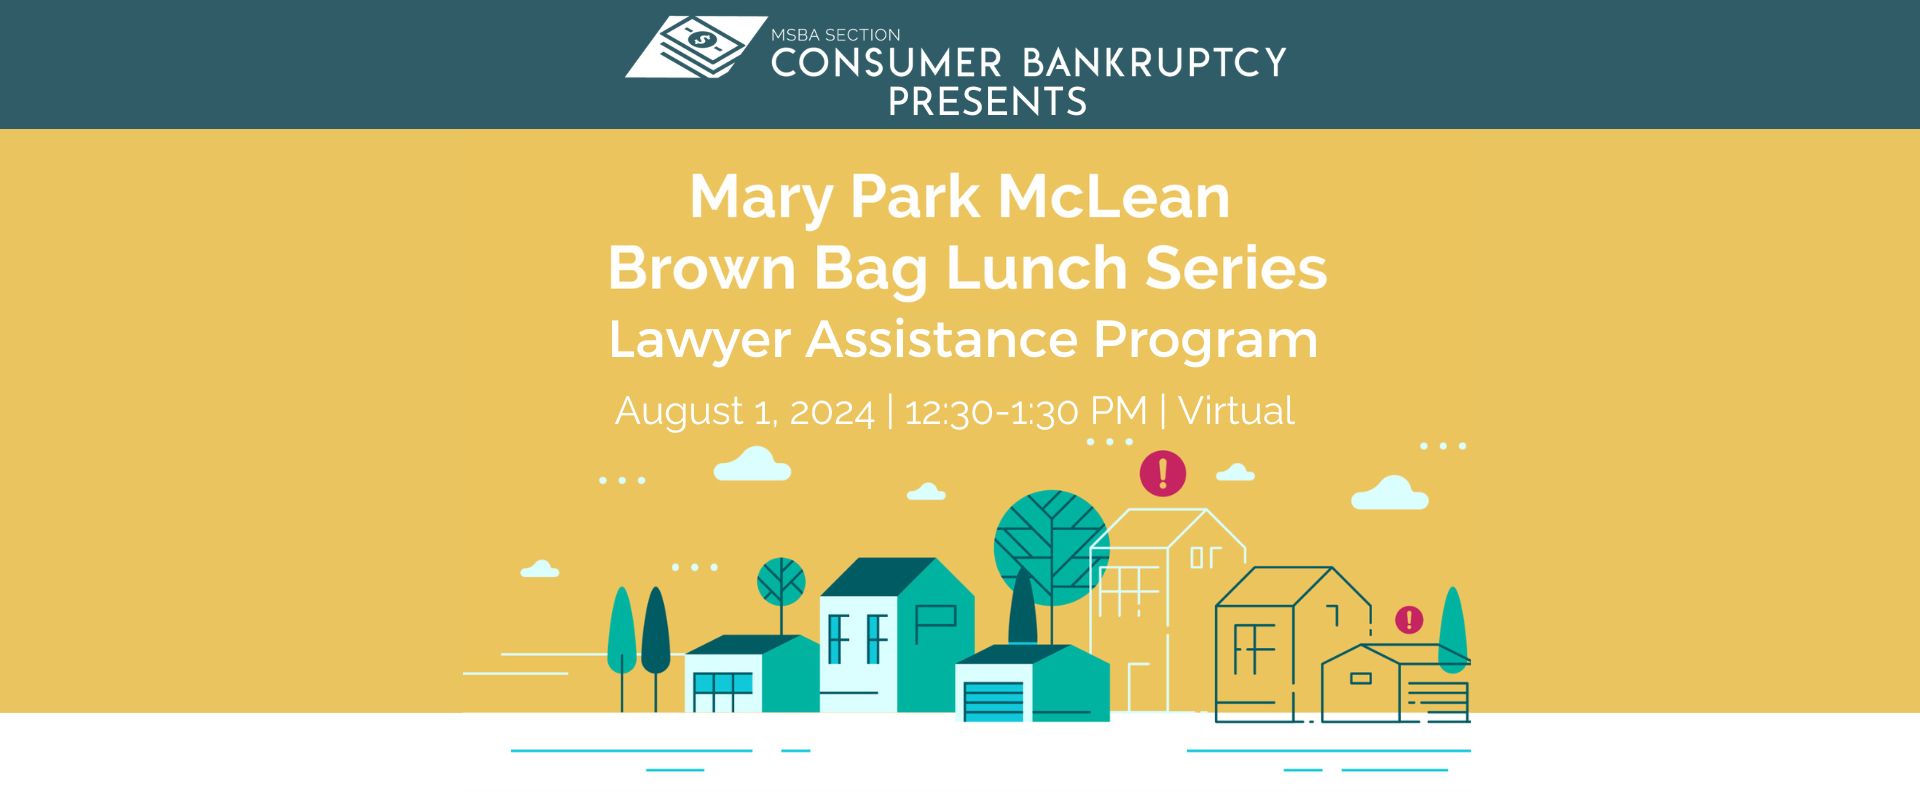 Mary Park McLean Brown Bag Lunch